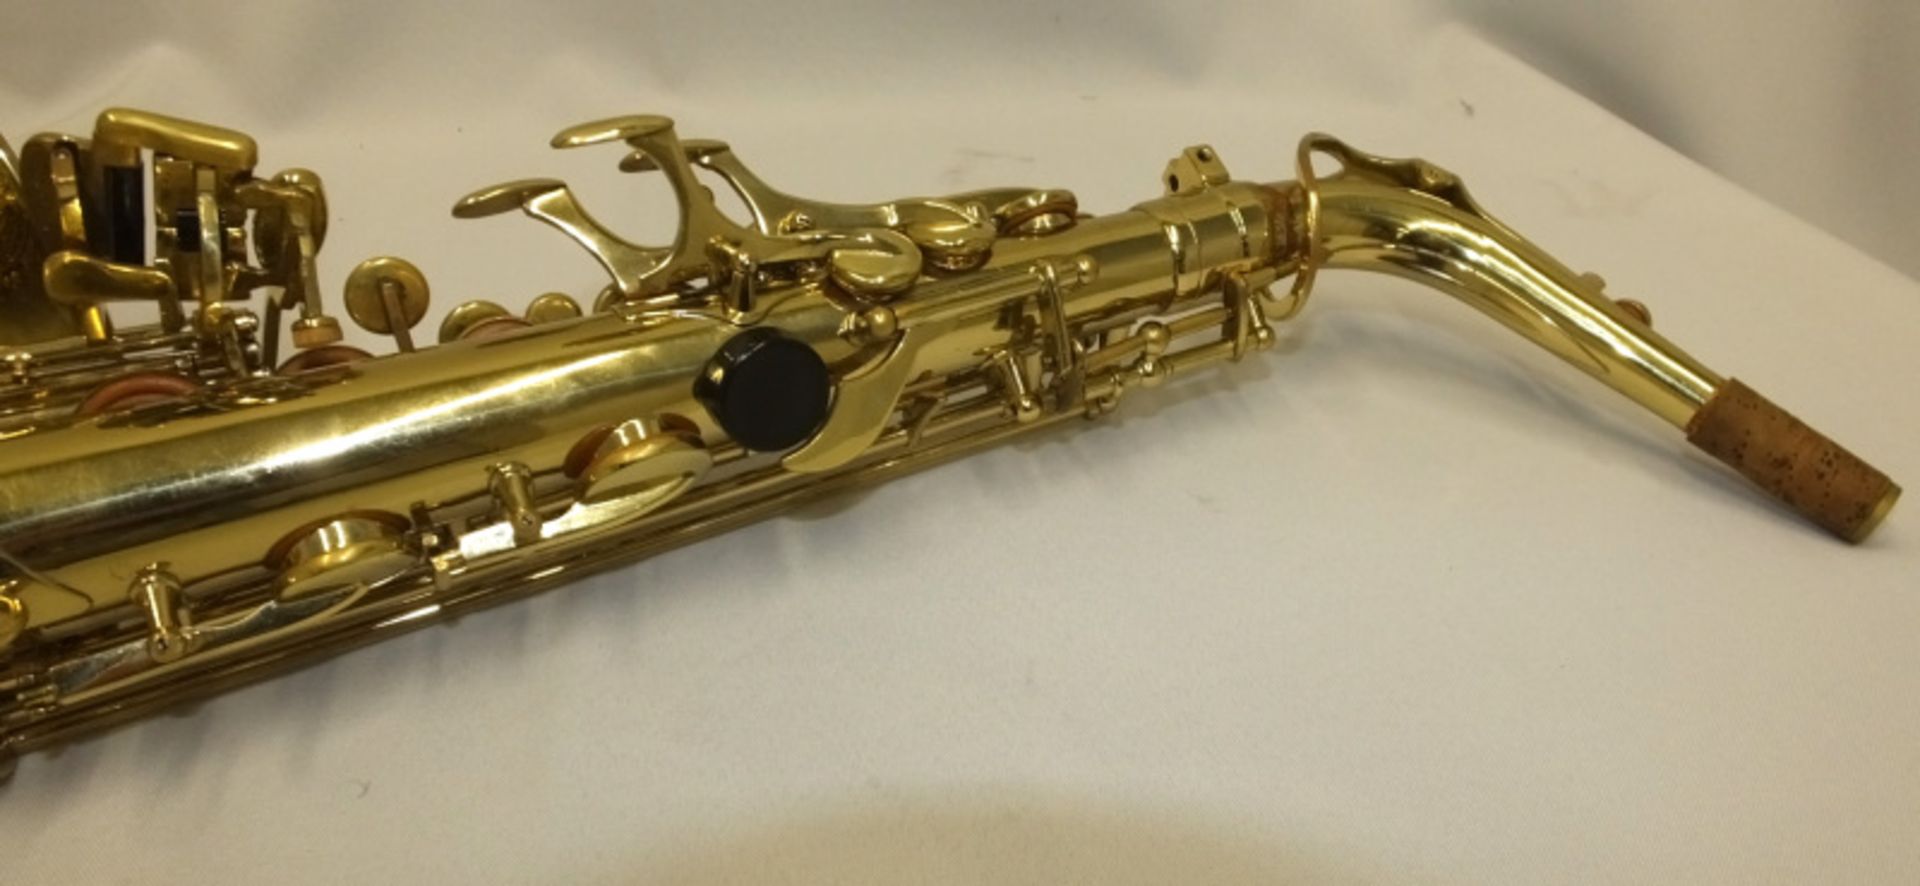 Simba Instruments Saxophone in Simba case - serial number 20960603 - Please check photos carefully - Image 12 of 16